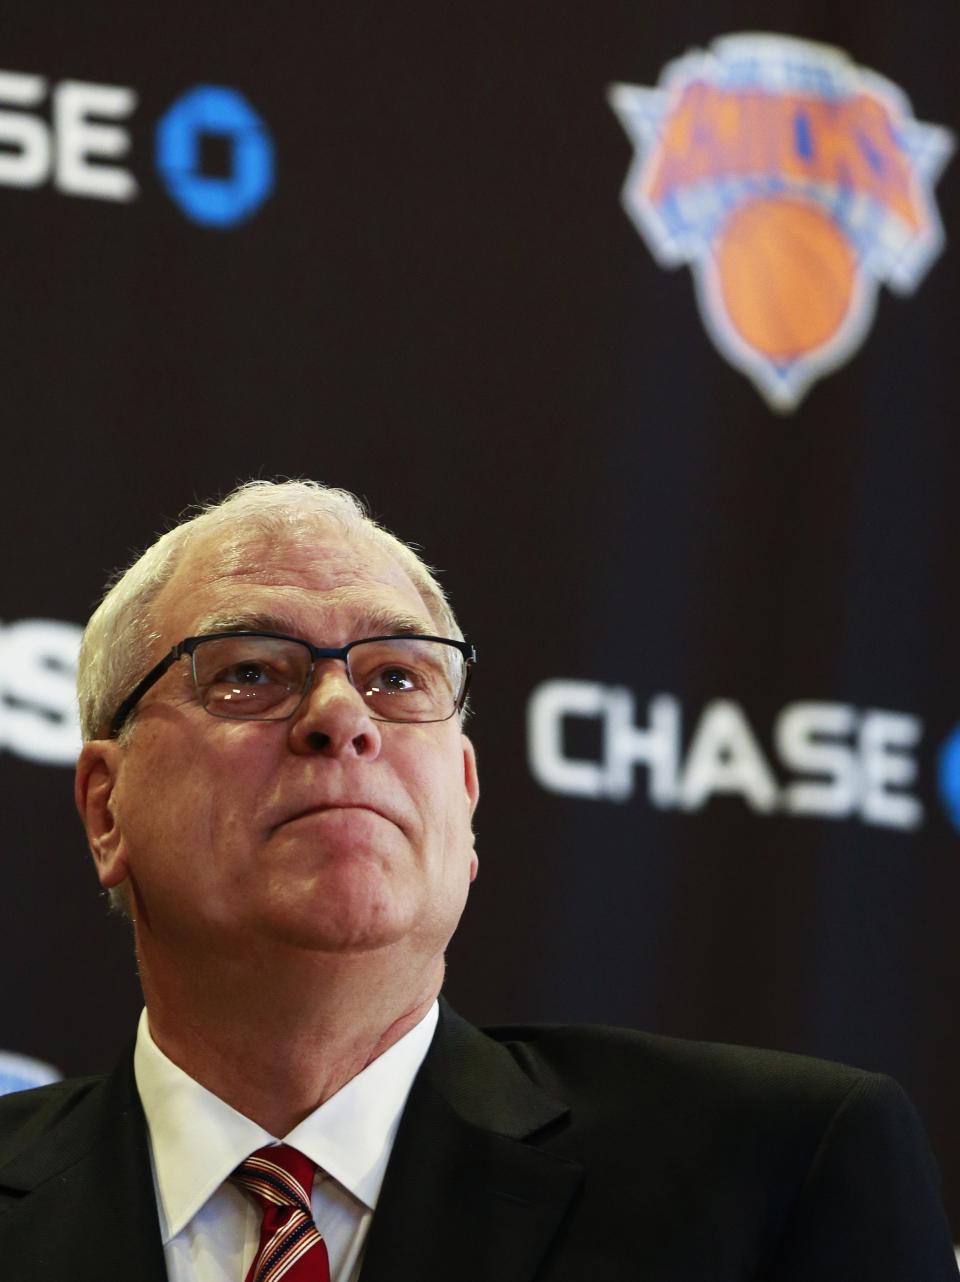 Phil Jackson looks on during a news conference announcing him as the team president of the New York Knicks basketball team at Madison Square Garden in New York March 18, 2014.REUTERS/Shannon Stapleton (UNITED STATES - Tags: SPORT BASKETBALL)